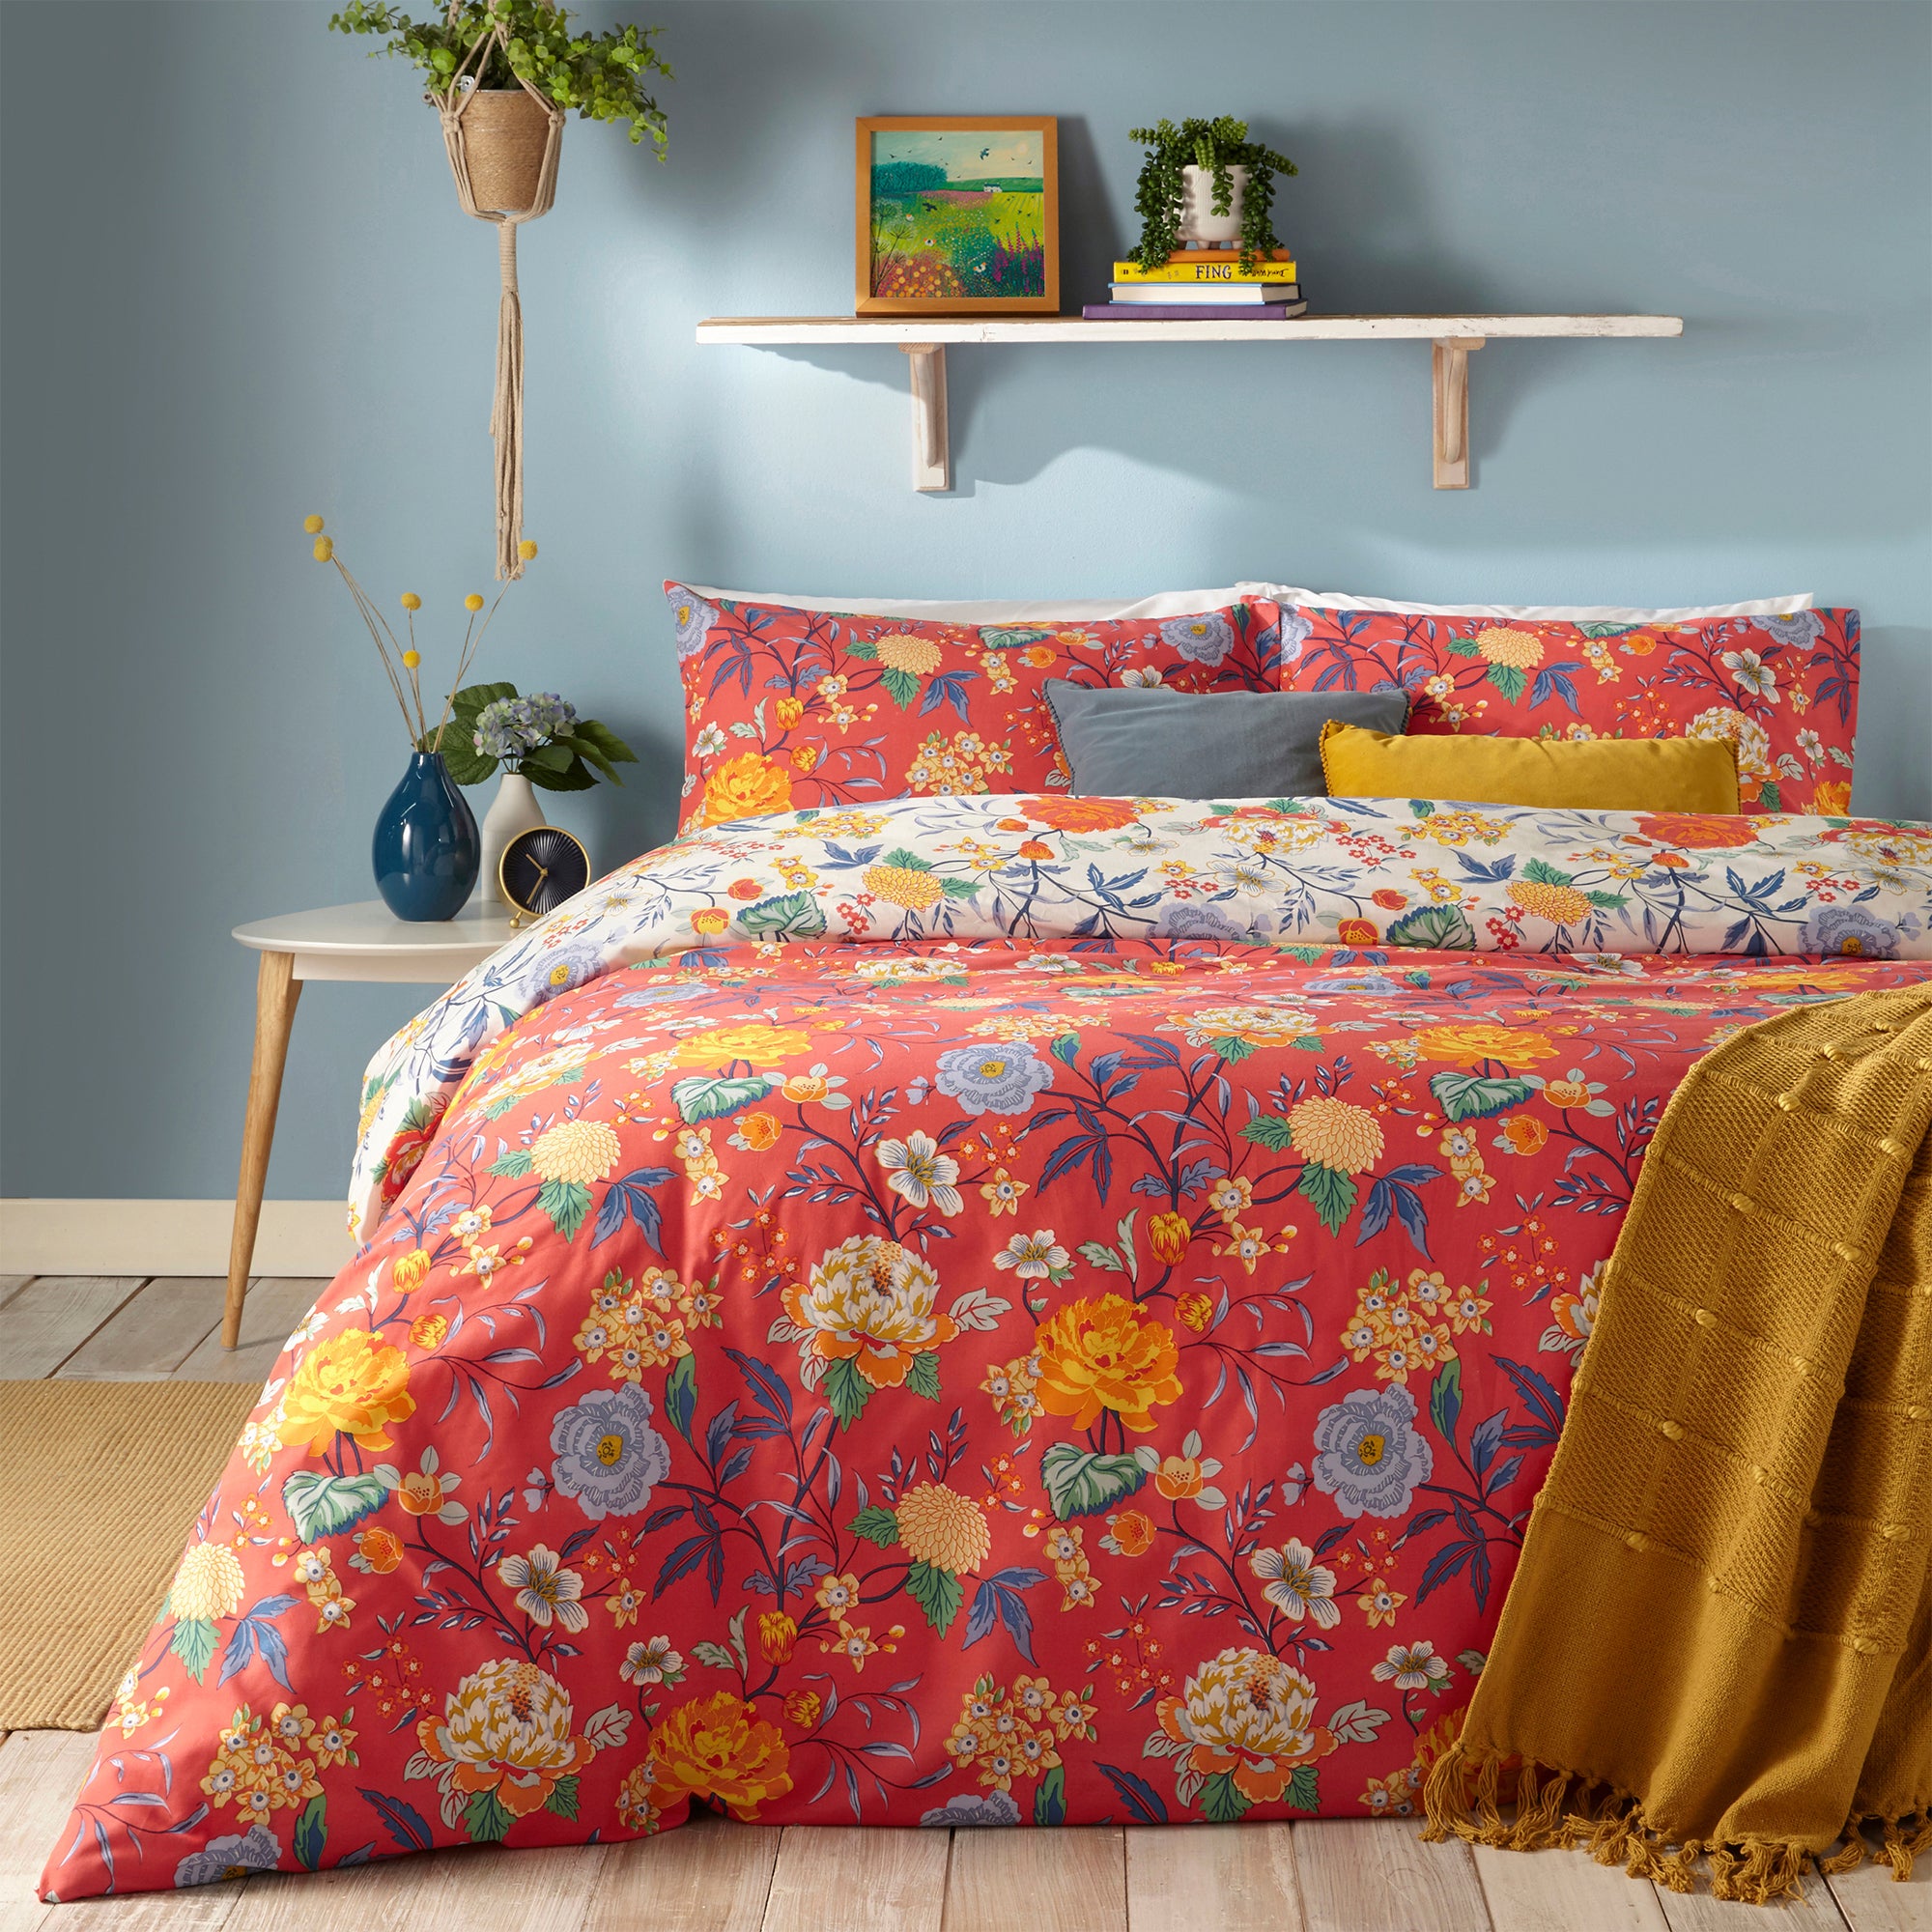 Photos - Pillowcase Azalea furn.  Red Reversible Duvet Cover and  Set Red/Blue/Yellow 